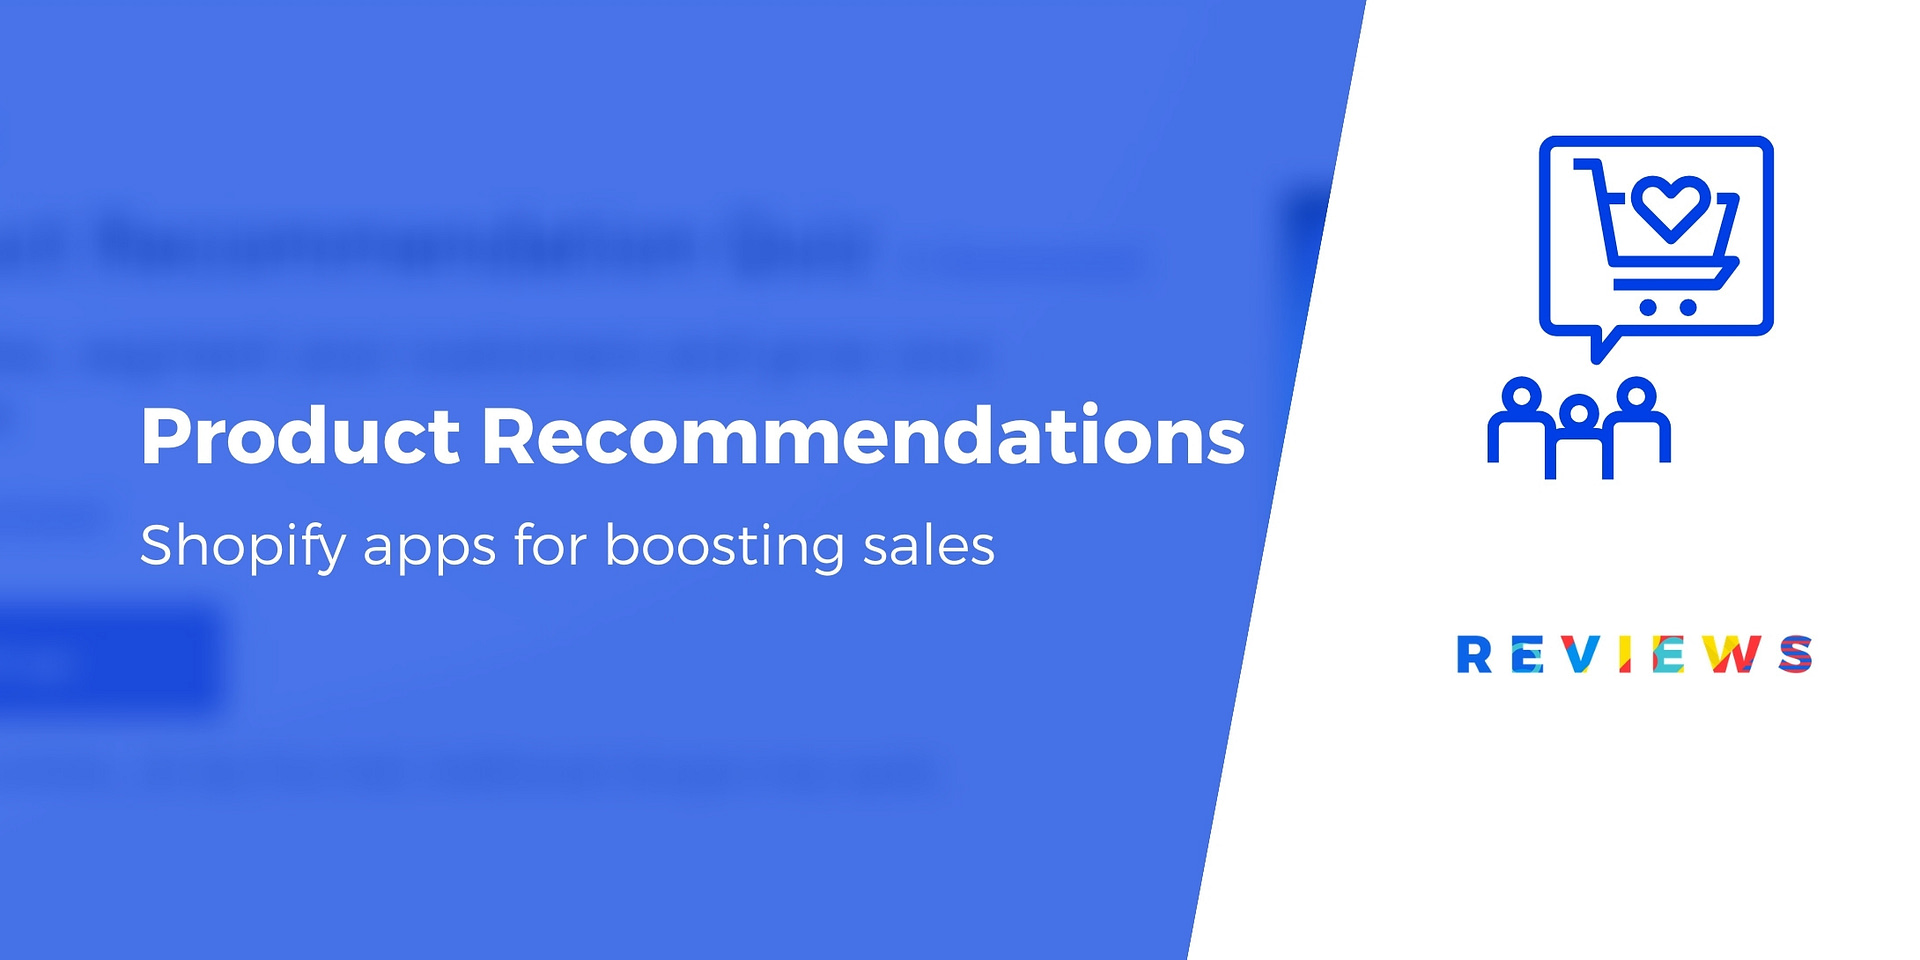 Product recommendation quiz and video quizzes for Shopify